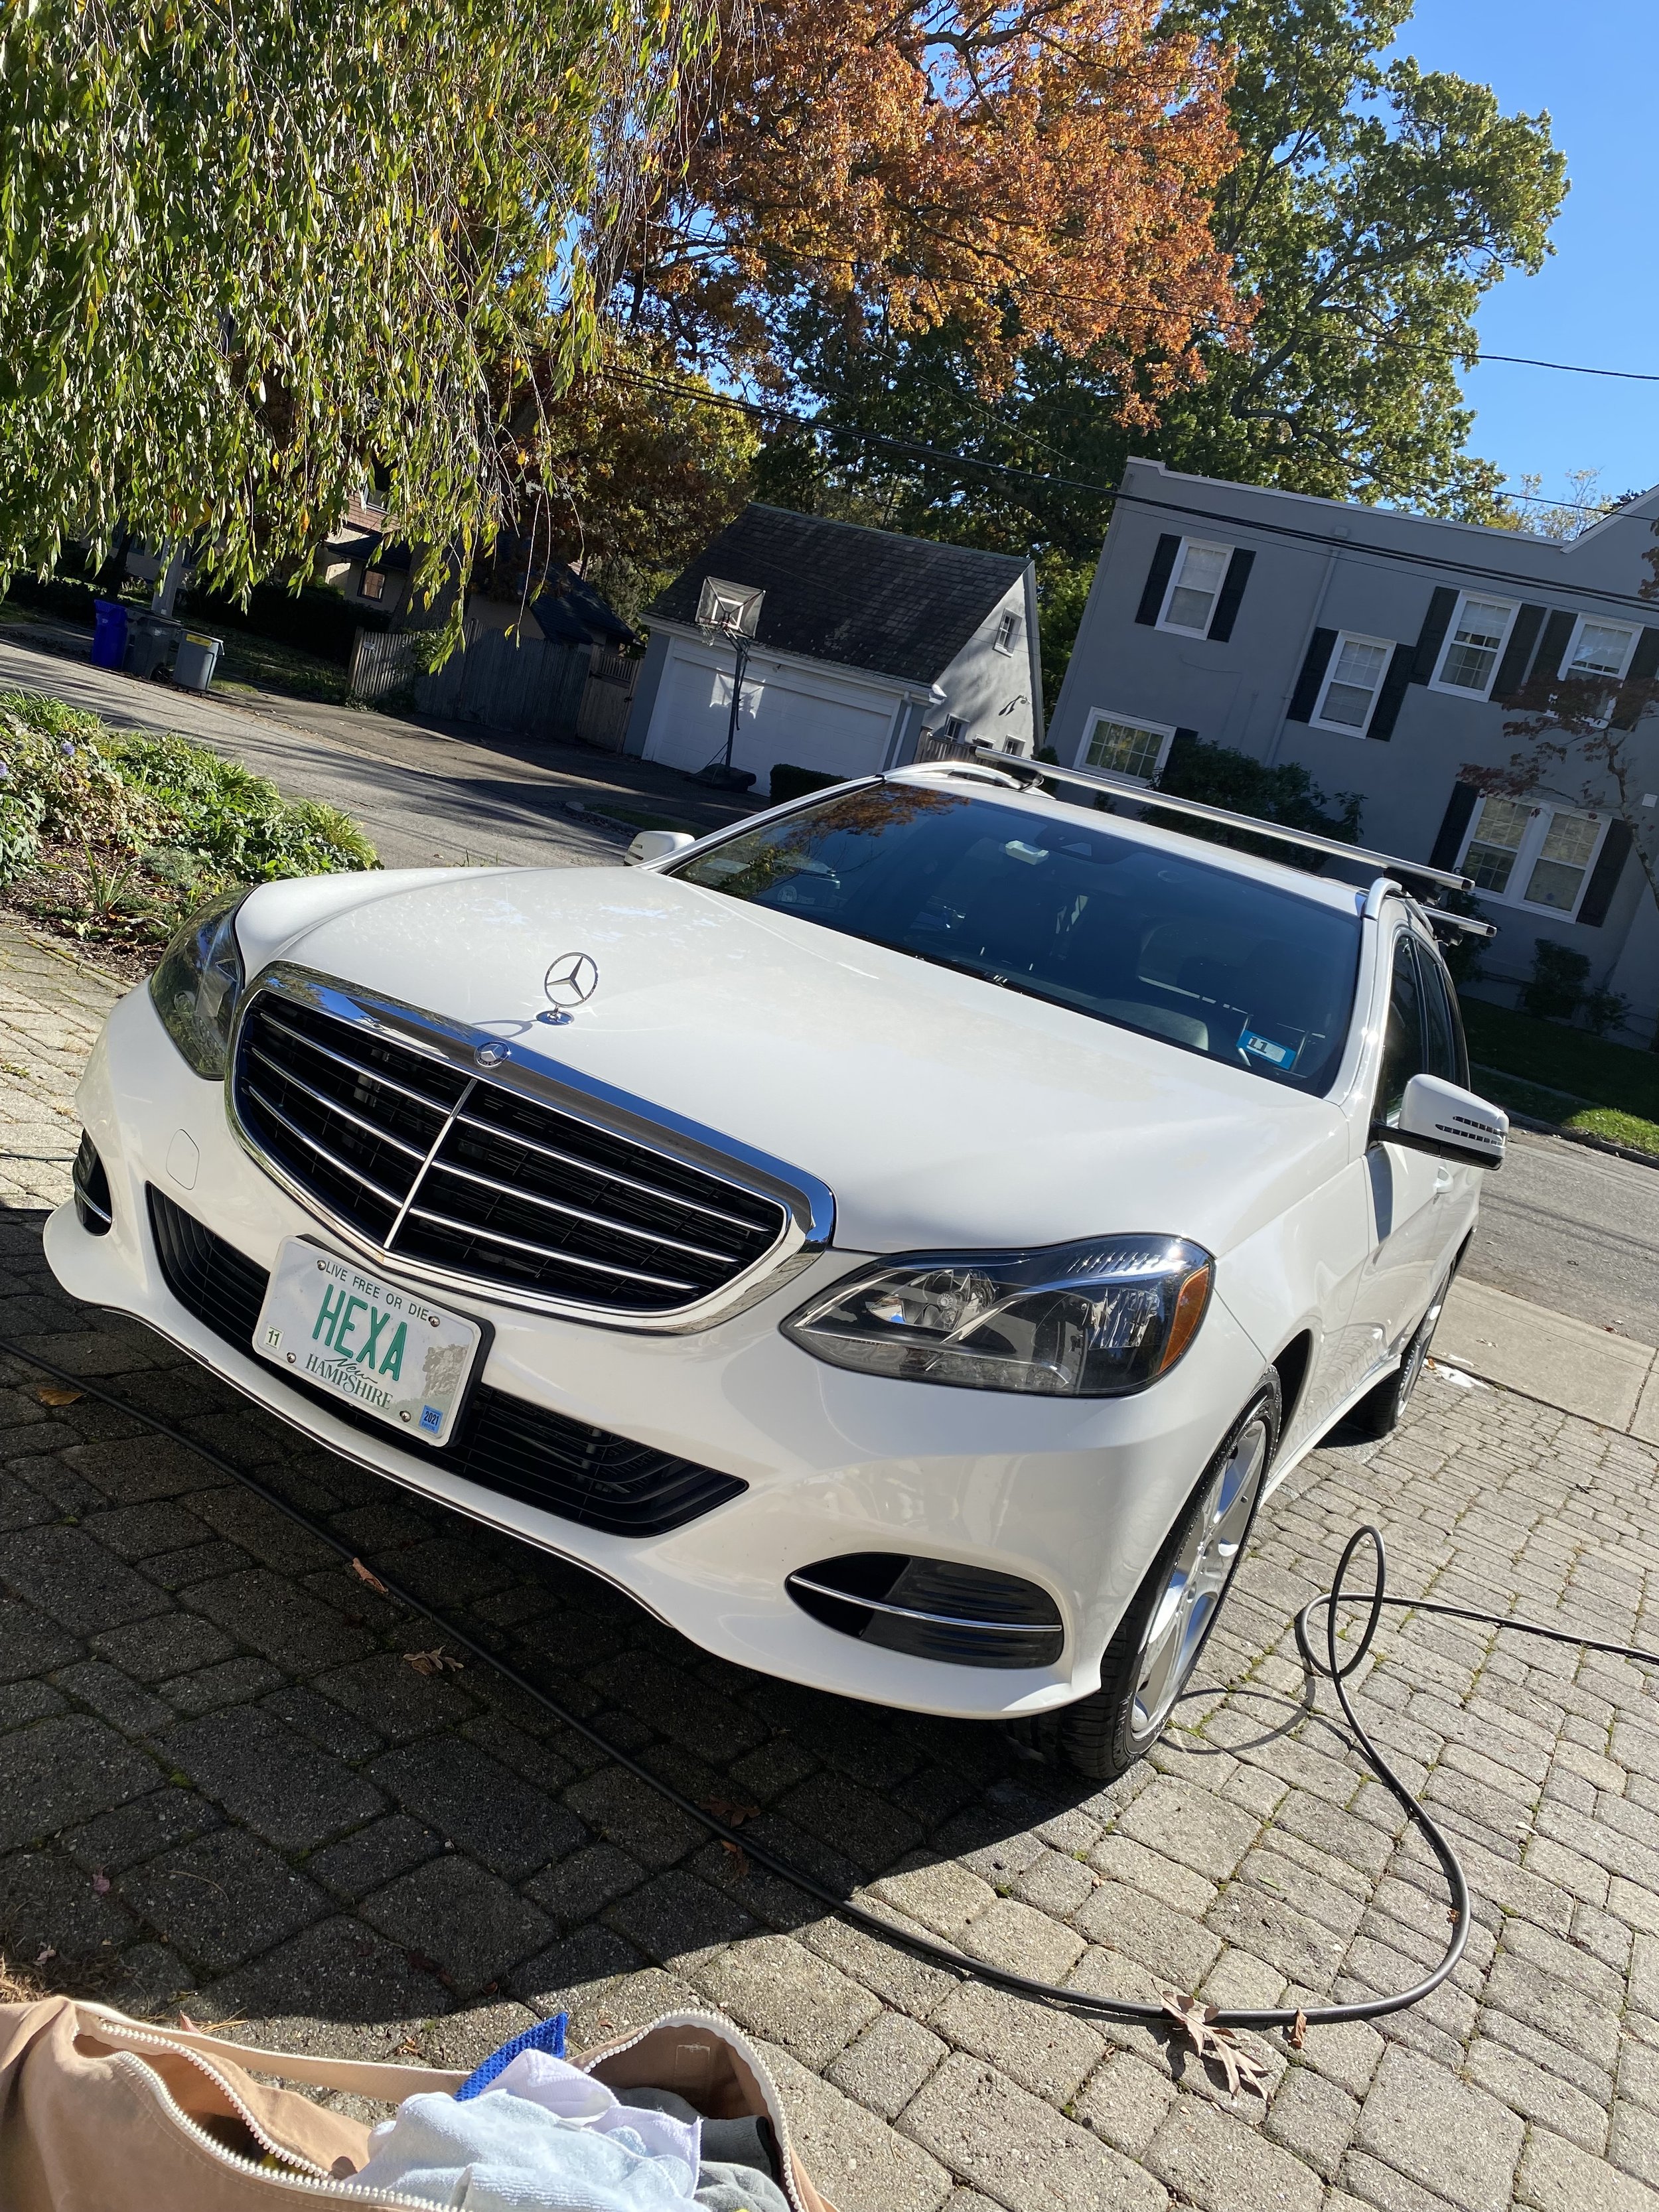 The Best Interior Car Cleaning Detailers In Rhode Island — Jay's